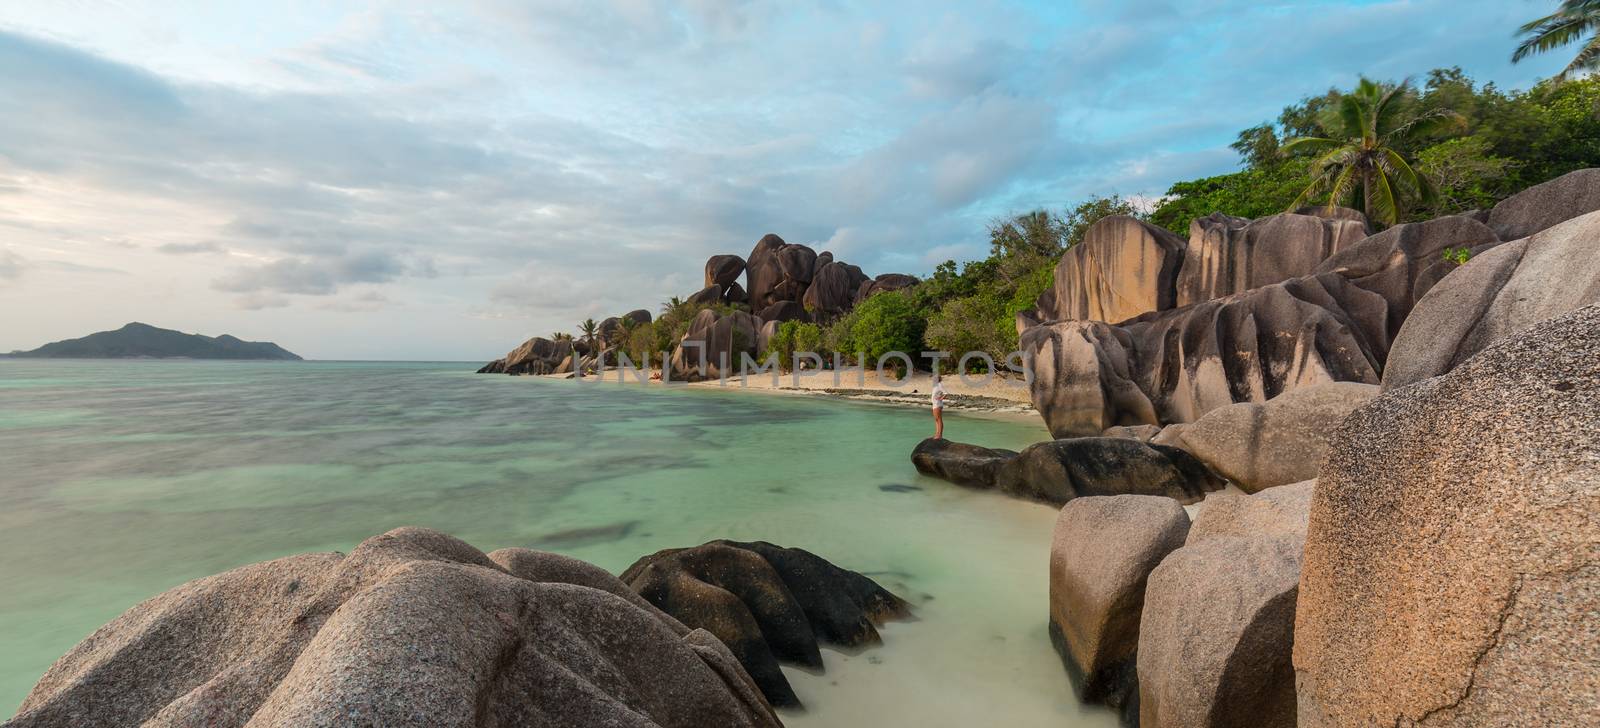 Dramatic sunset at Anse Source d'Argent beach, La Digue island, Seychelles by kasto